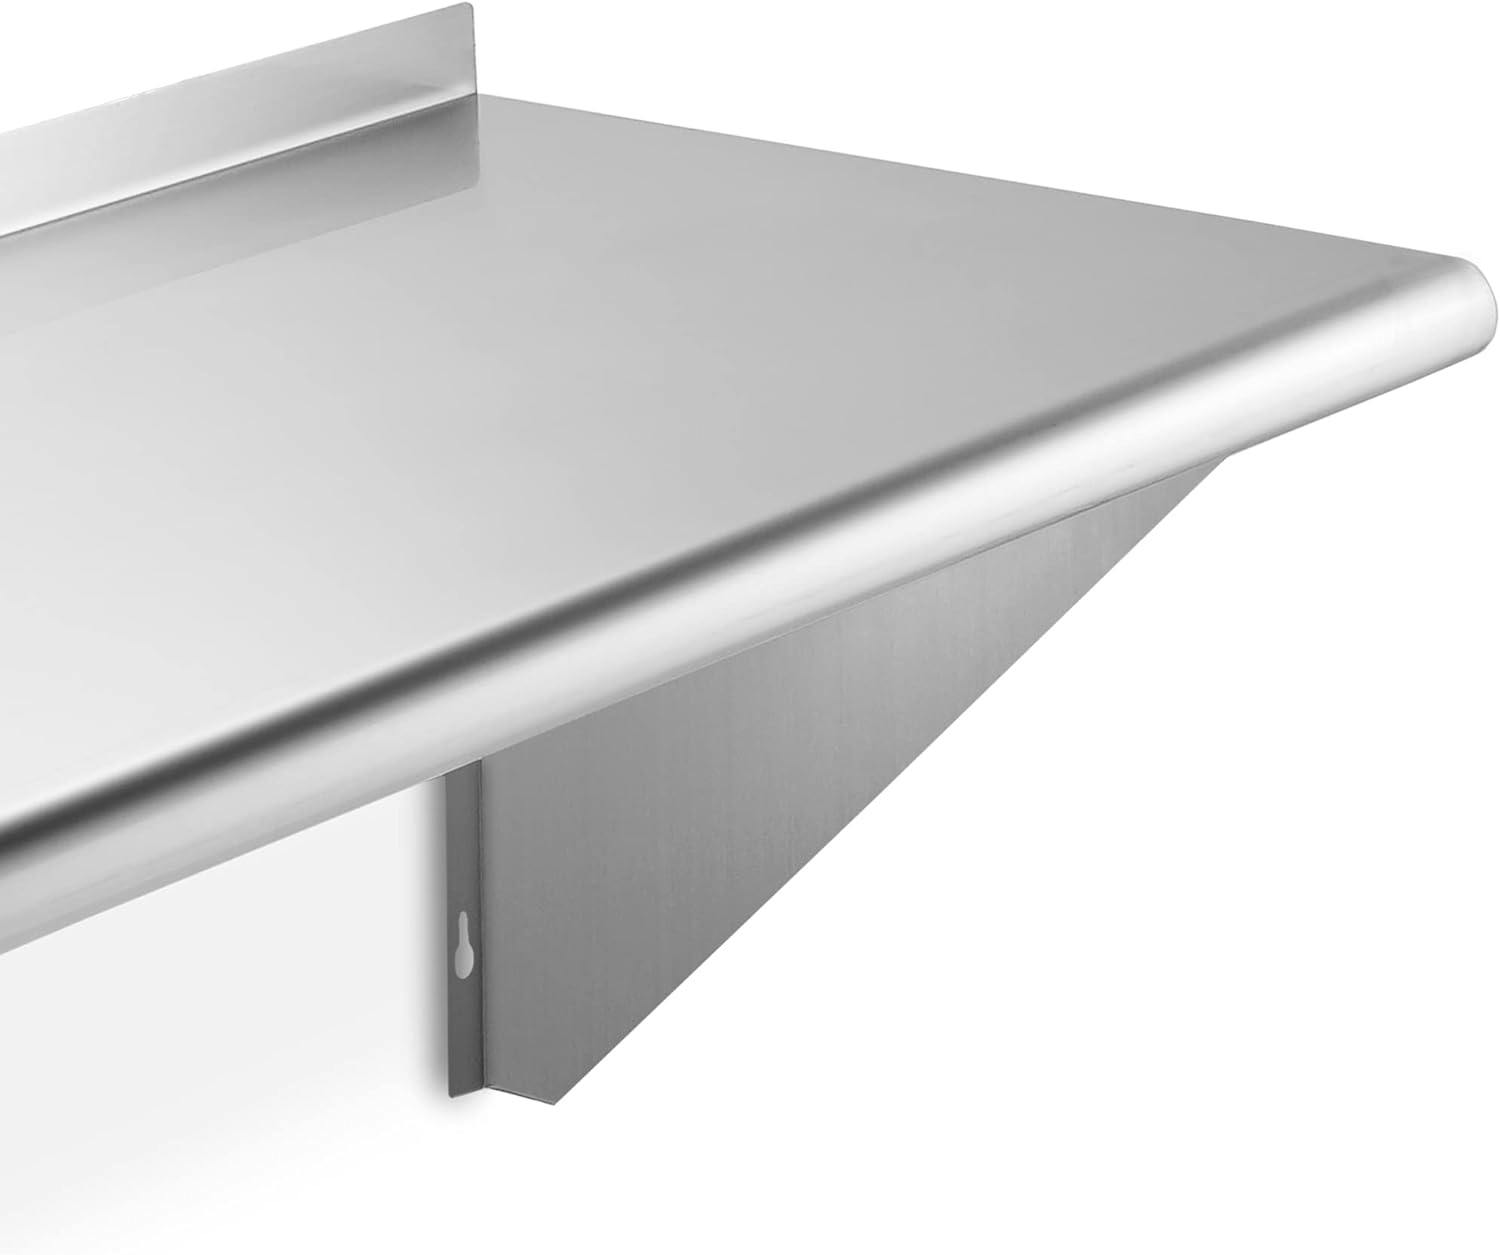 MaxiSpace 48" Silver Stainless Steel Commercial Kitchen Wall Shelf